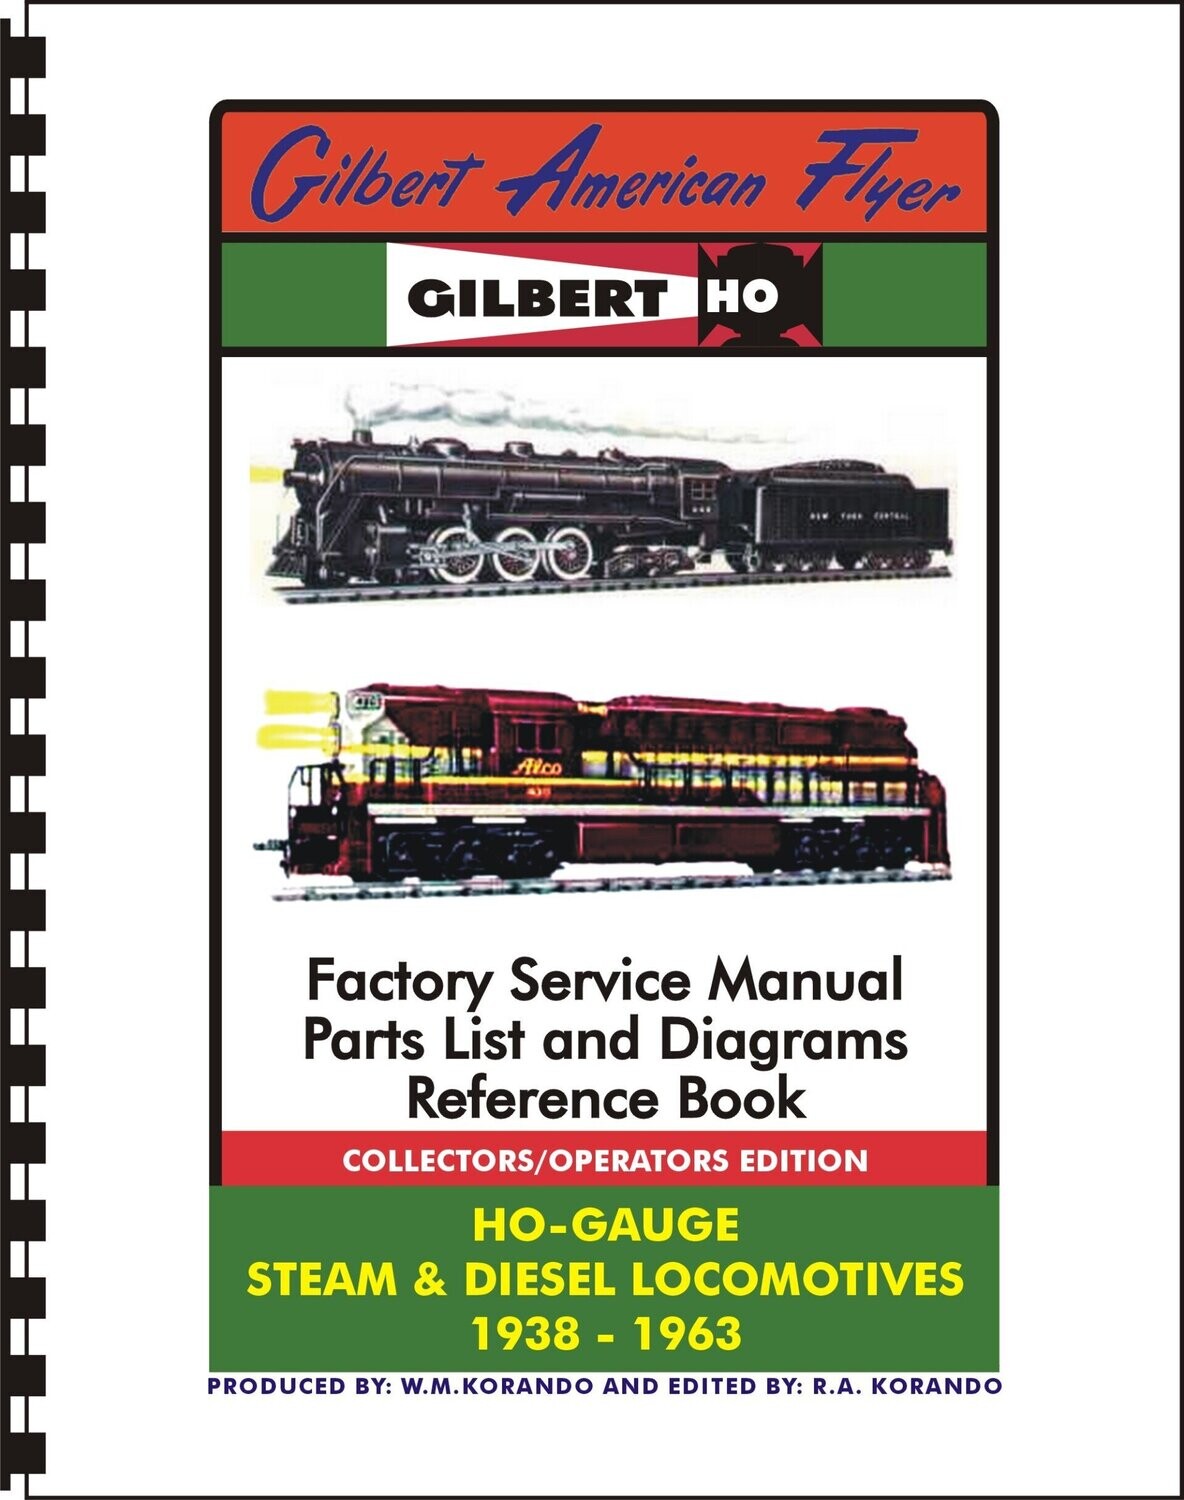 BOOK: "FACTORY SERVICE MANUAL for GILBERT HO ENGINES"; Exploded views, parts lists, & wiring diagrams; 400+ pages; M. Korando; 2015